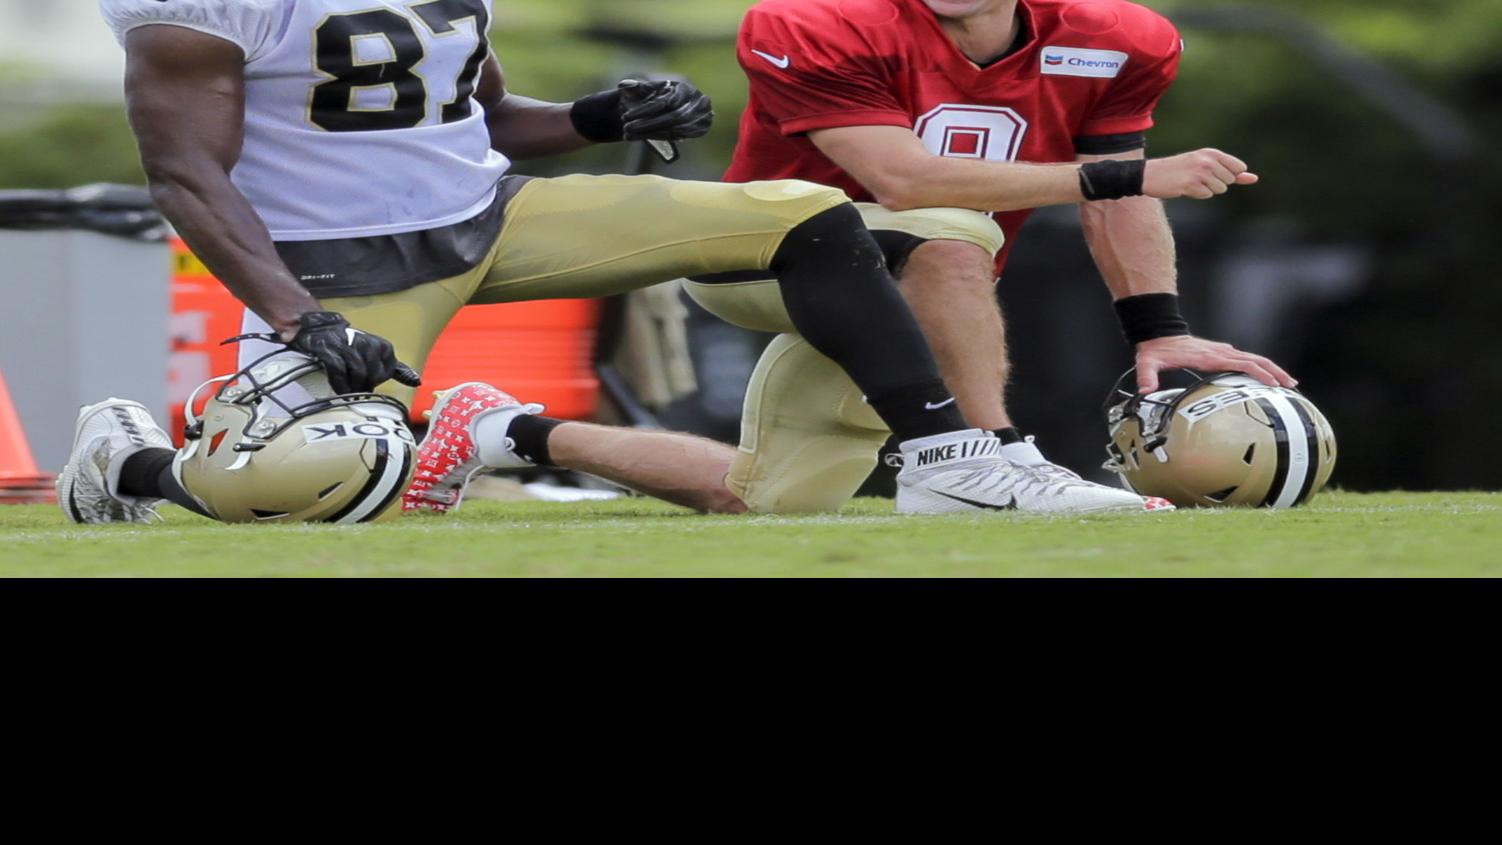 Drew Brees rocks custom made Louis Vuitton cleats at practice